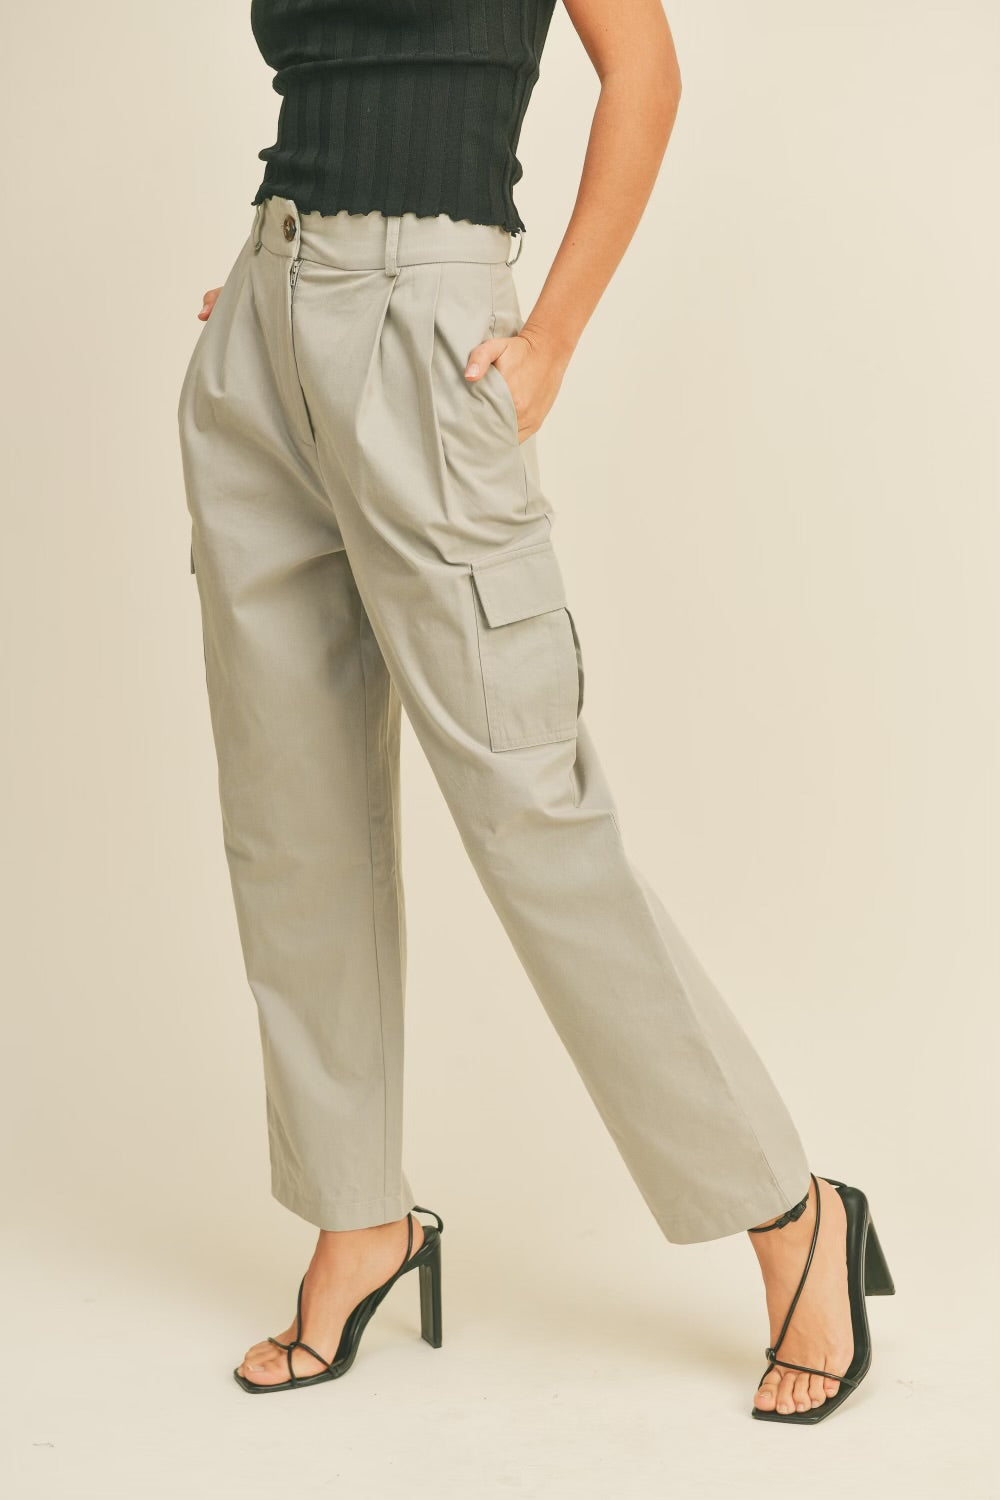 A model wearing a beige high rise cargo pant against a tan wall.